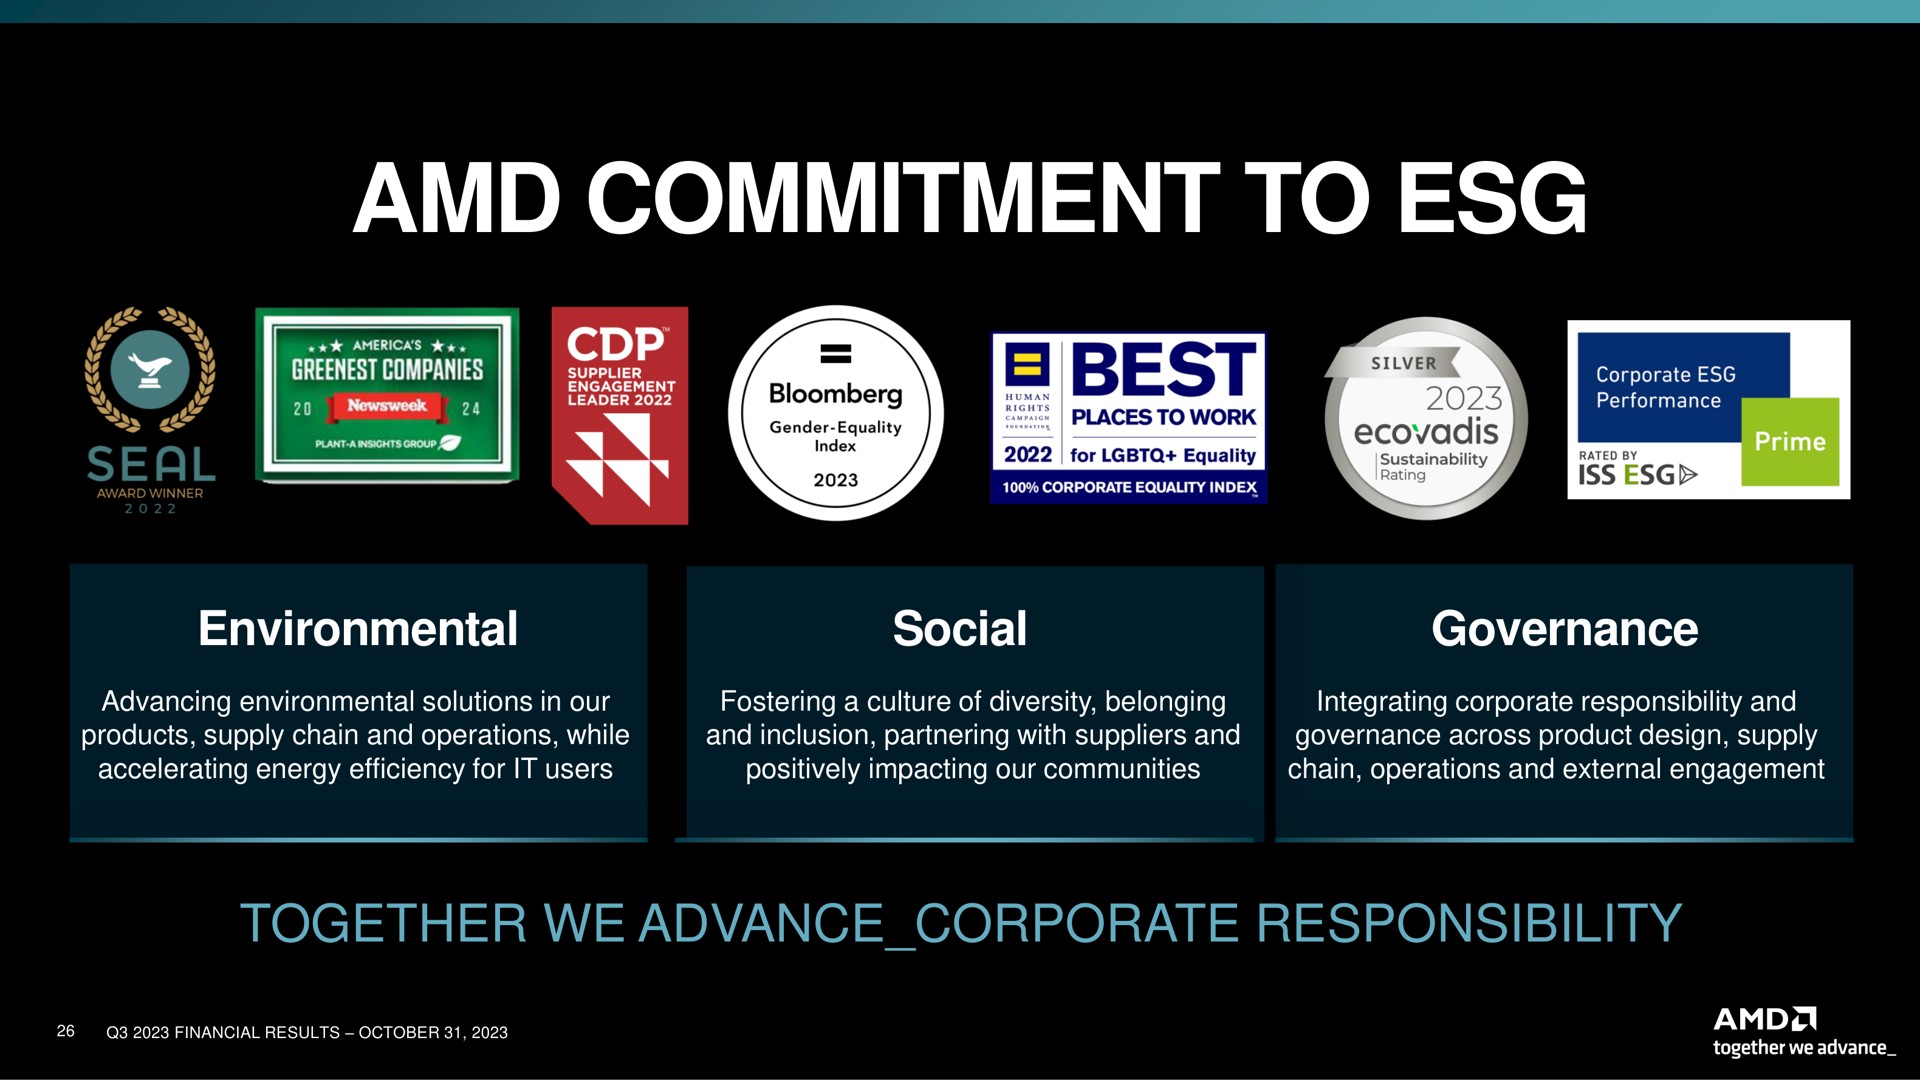 commitment to environmental social governance together we advance corporate responsibility | AMD